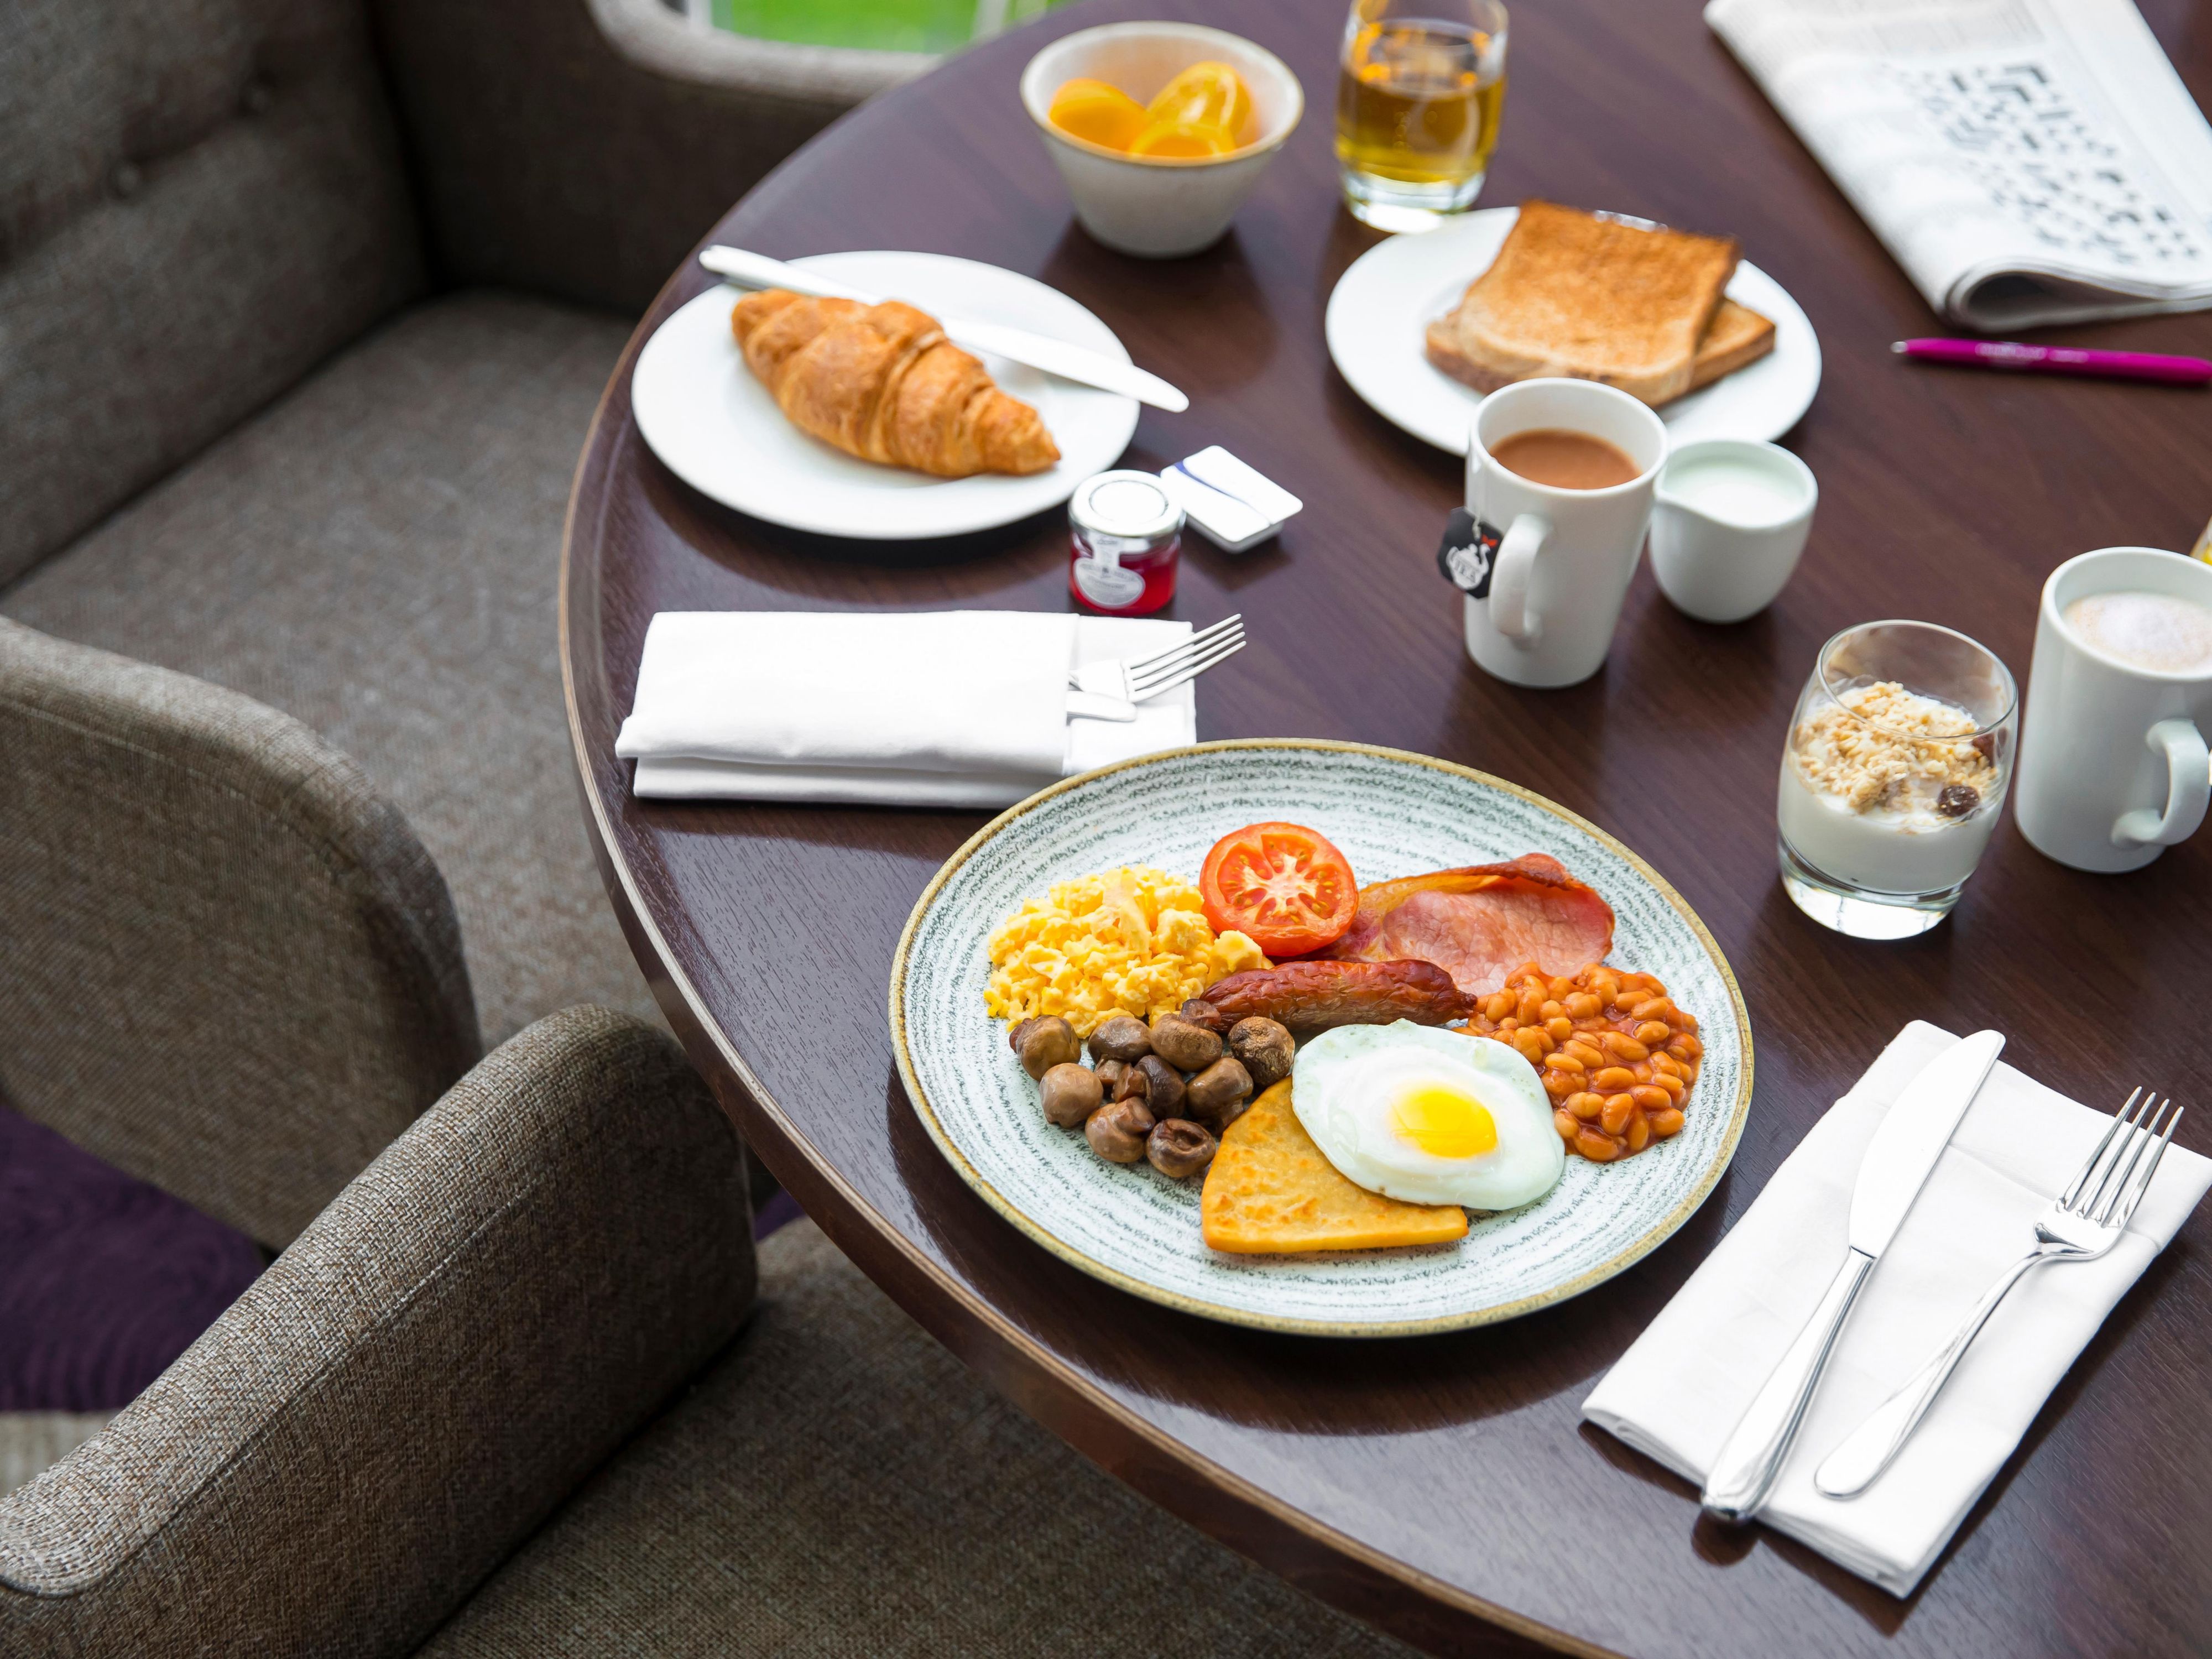 Based in Finnieston with a nod to the shipyards, our Mariner Restaurant is the setting for our infamous Scottish breakfast, relaxed evening meal, and luxurious afternoon tea. Whether you are staying in the hotel or celebrating a special occasion, we'll have something to whet your appetite.

Menu subject to change.
